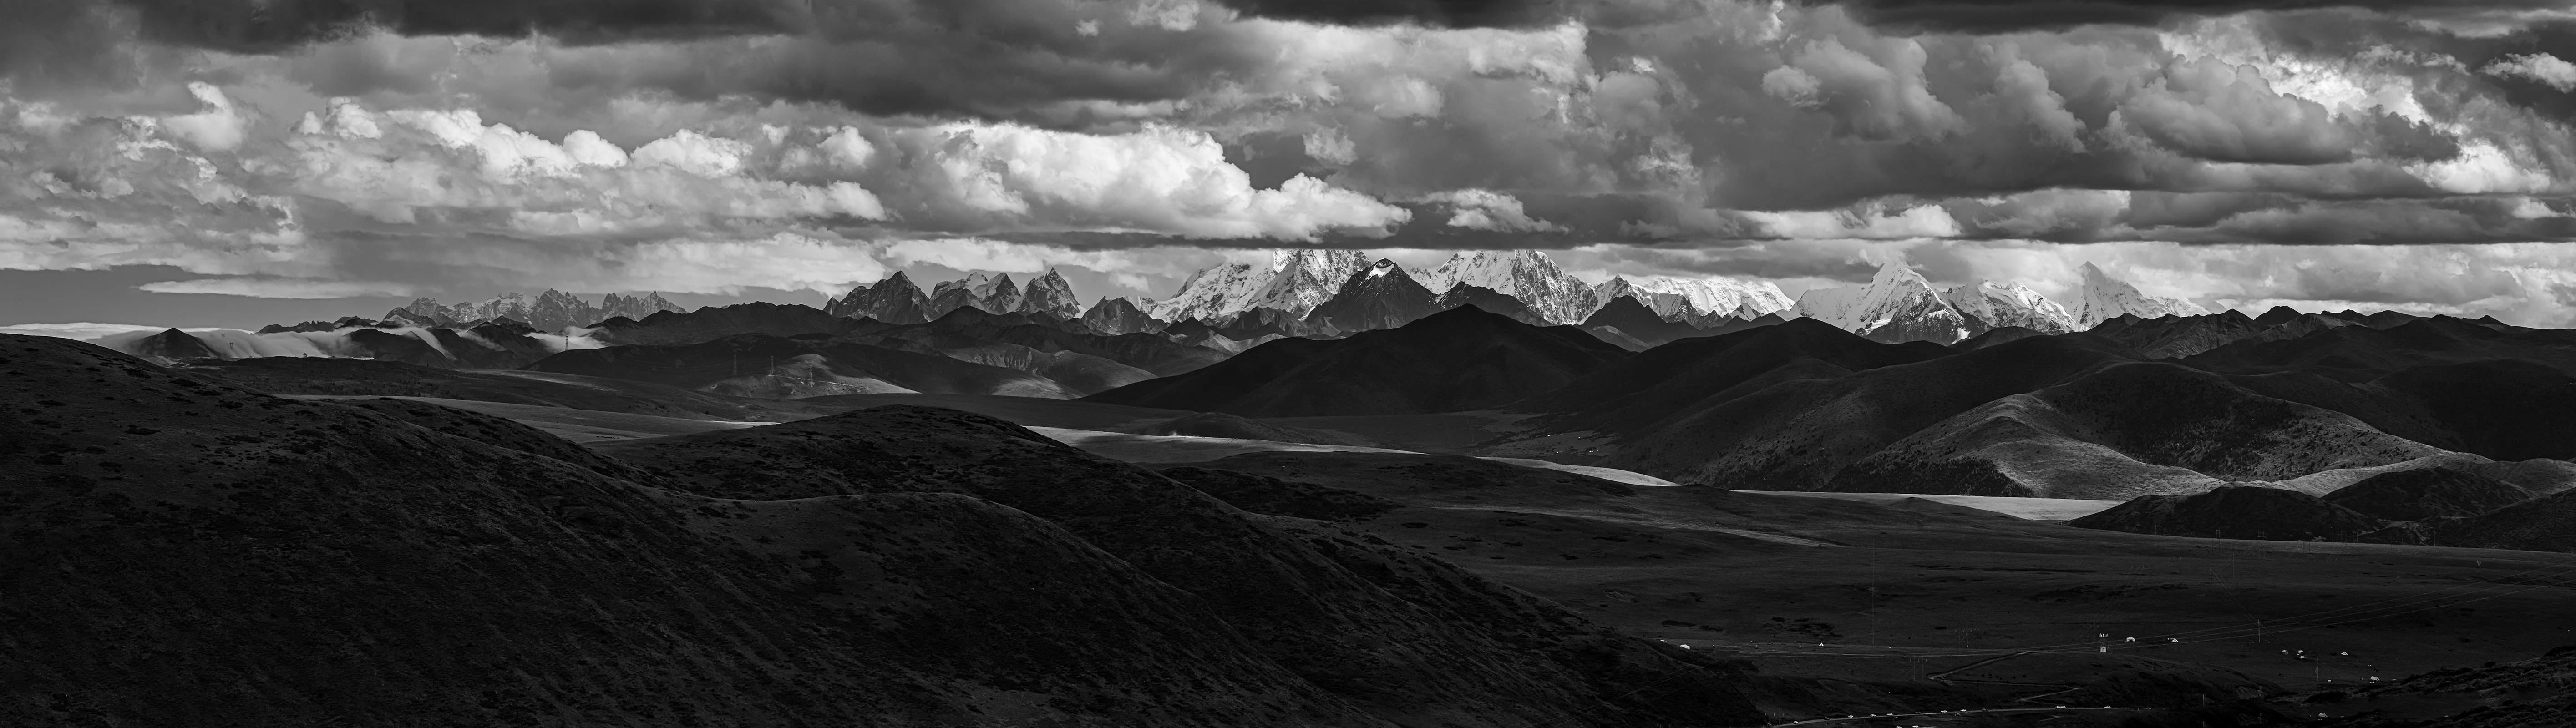 Snowy Peak Mountain Top Monochrome Panorama Nature Landscape Sky Clouds Mountains 5660x1600